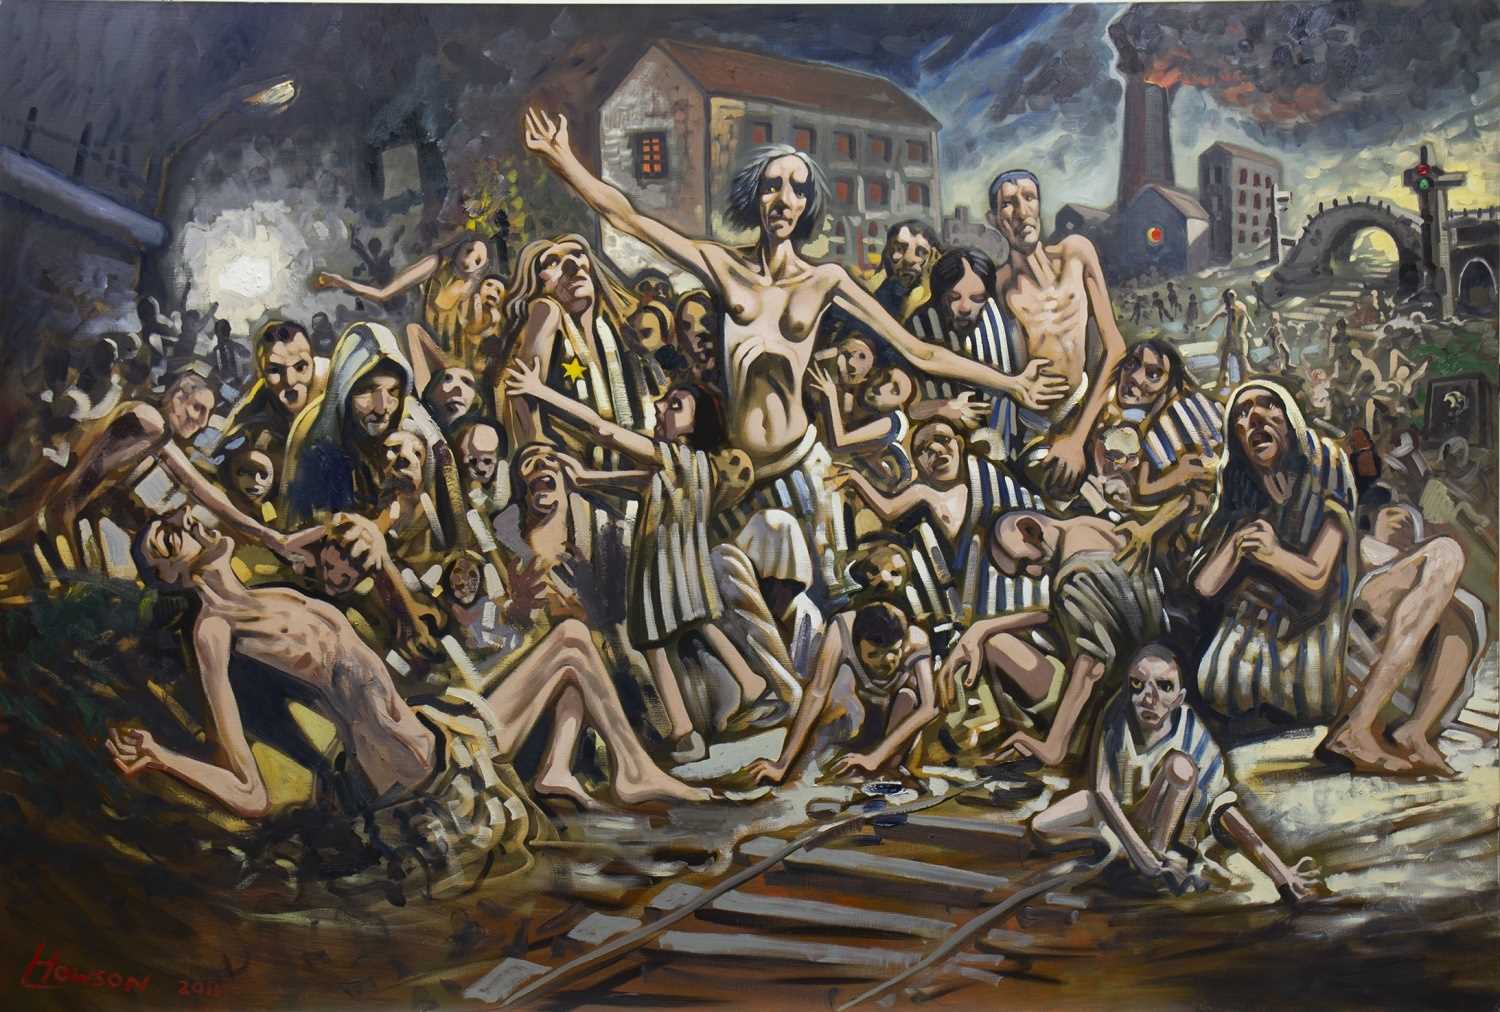 Lot 714 - HOLOCAUST CROWD SCENE I, AN OIL BY PETER HOWSON